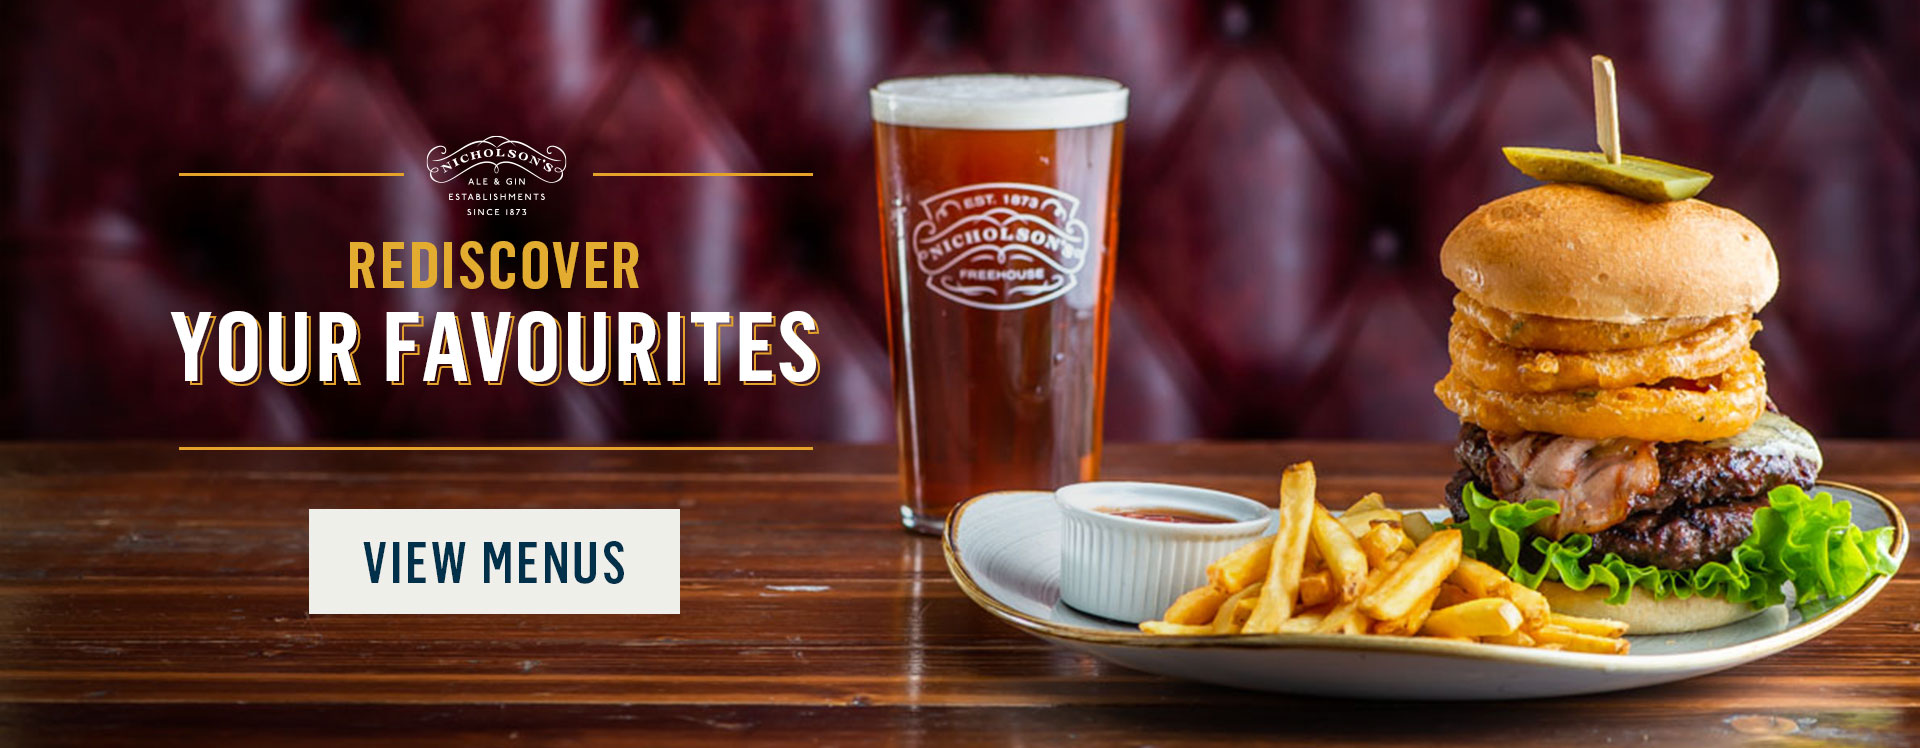 Rediscover your favourites at The Blackfriar